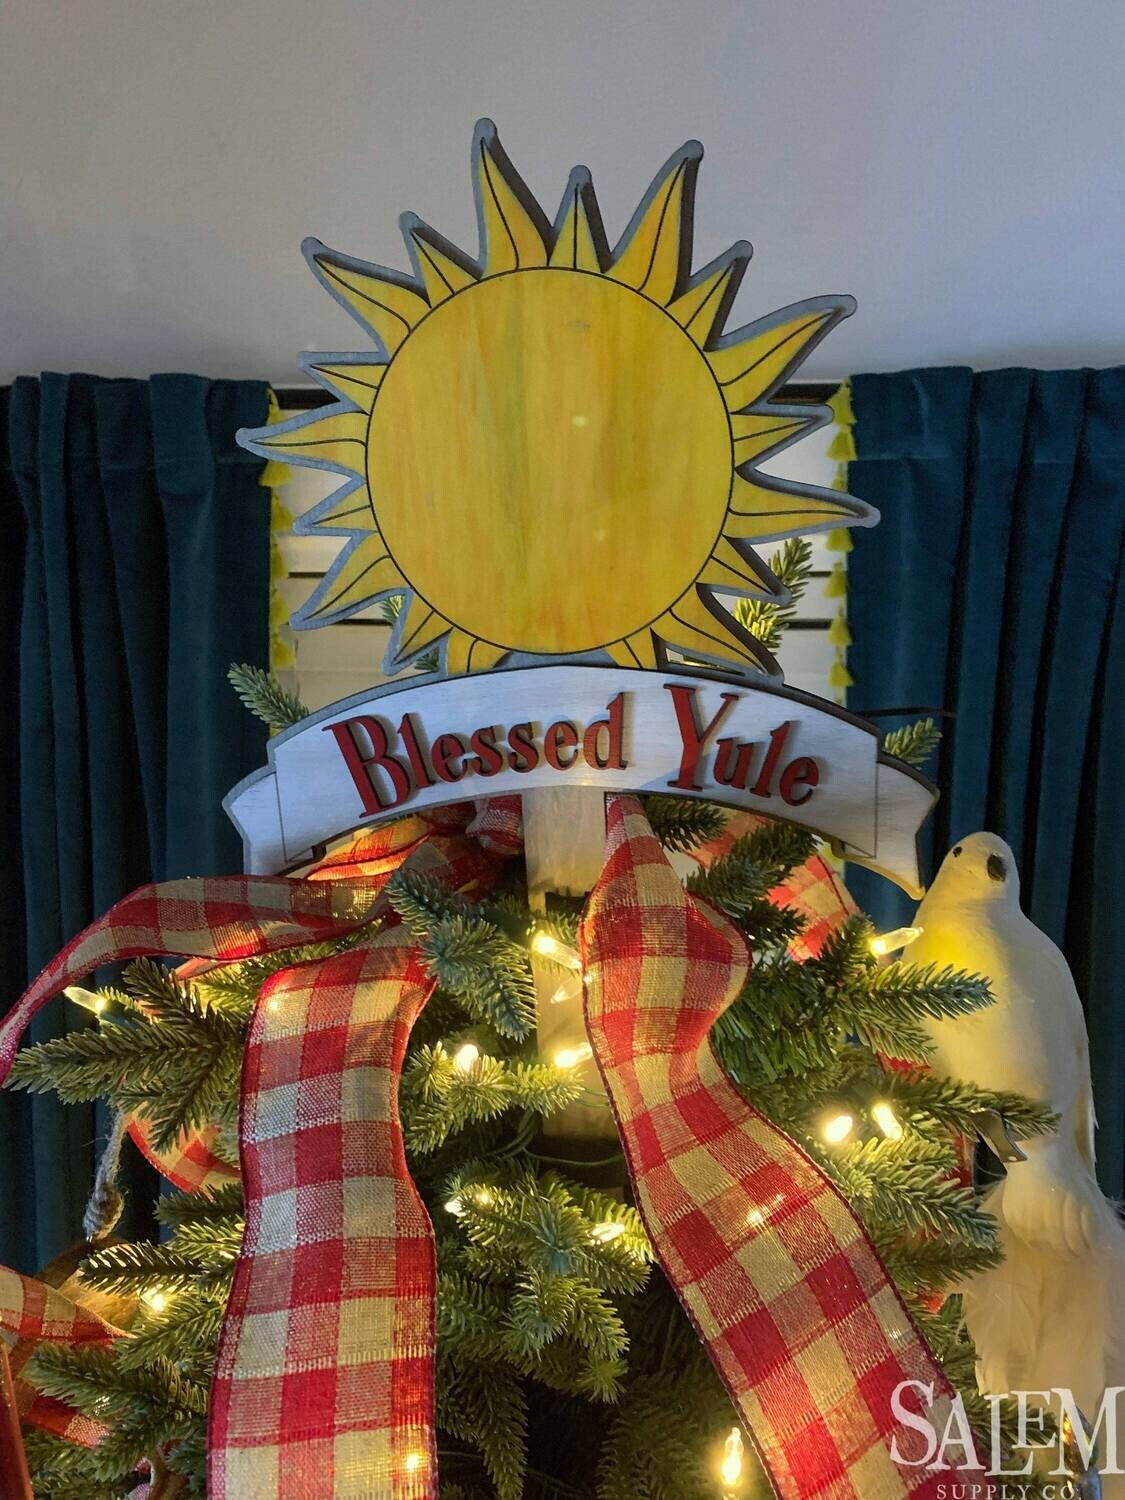 "Blessed Yule" Sun Christmas Tree Topper